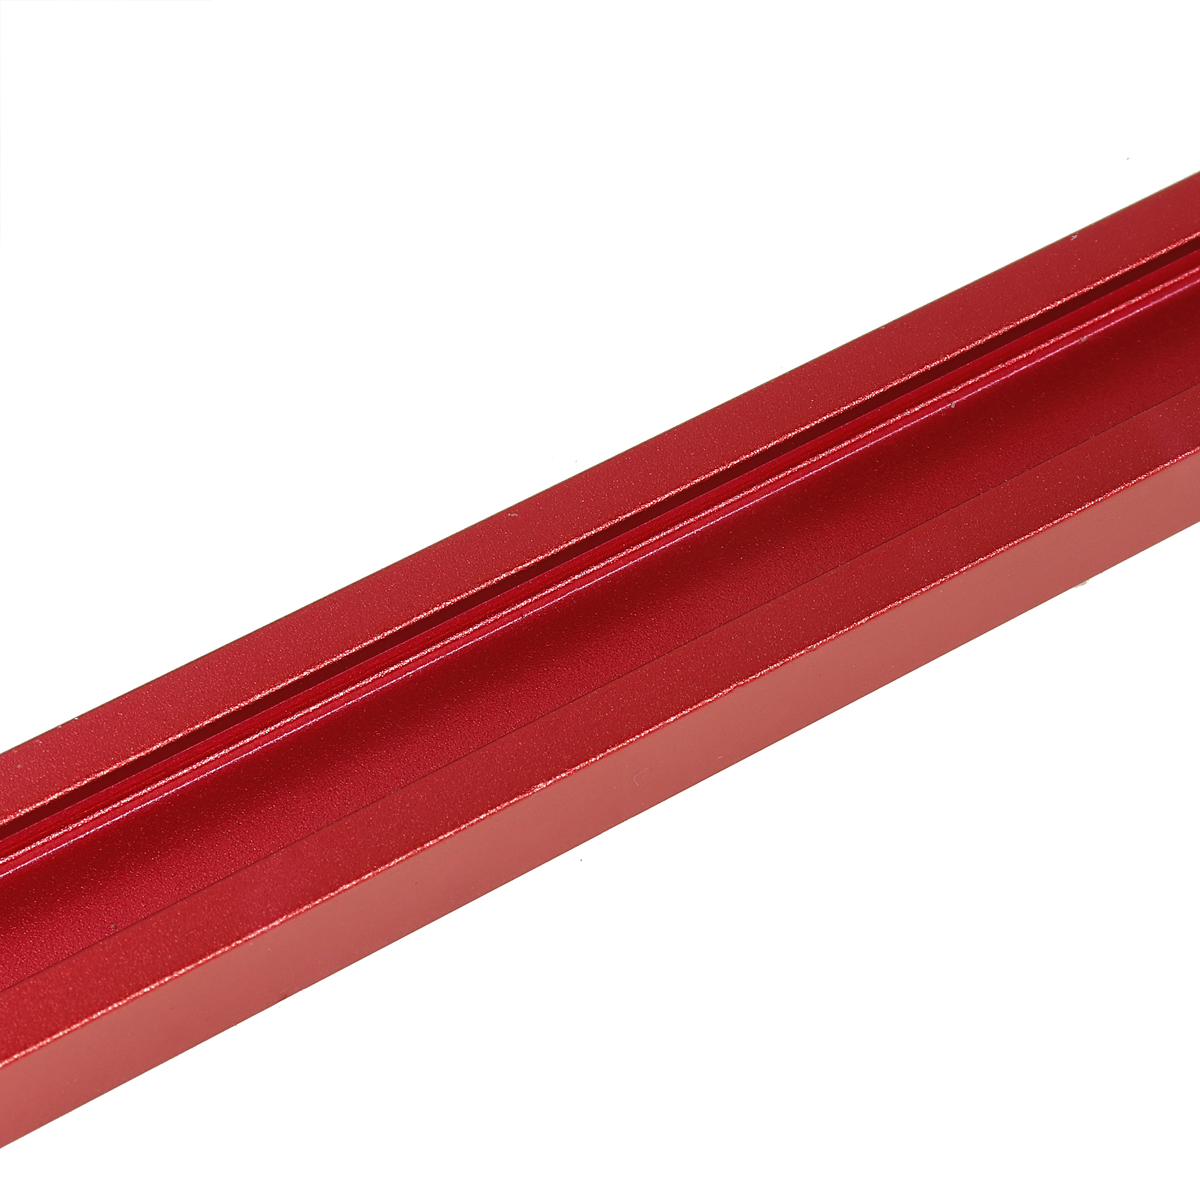 Red-Aluminum-Alloy-300-1220mm-T-track-T-slot-Miter-Track-Jig-T-Screw-Fixture-Slot-19x95mm-For-Table--1682608-9